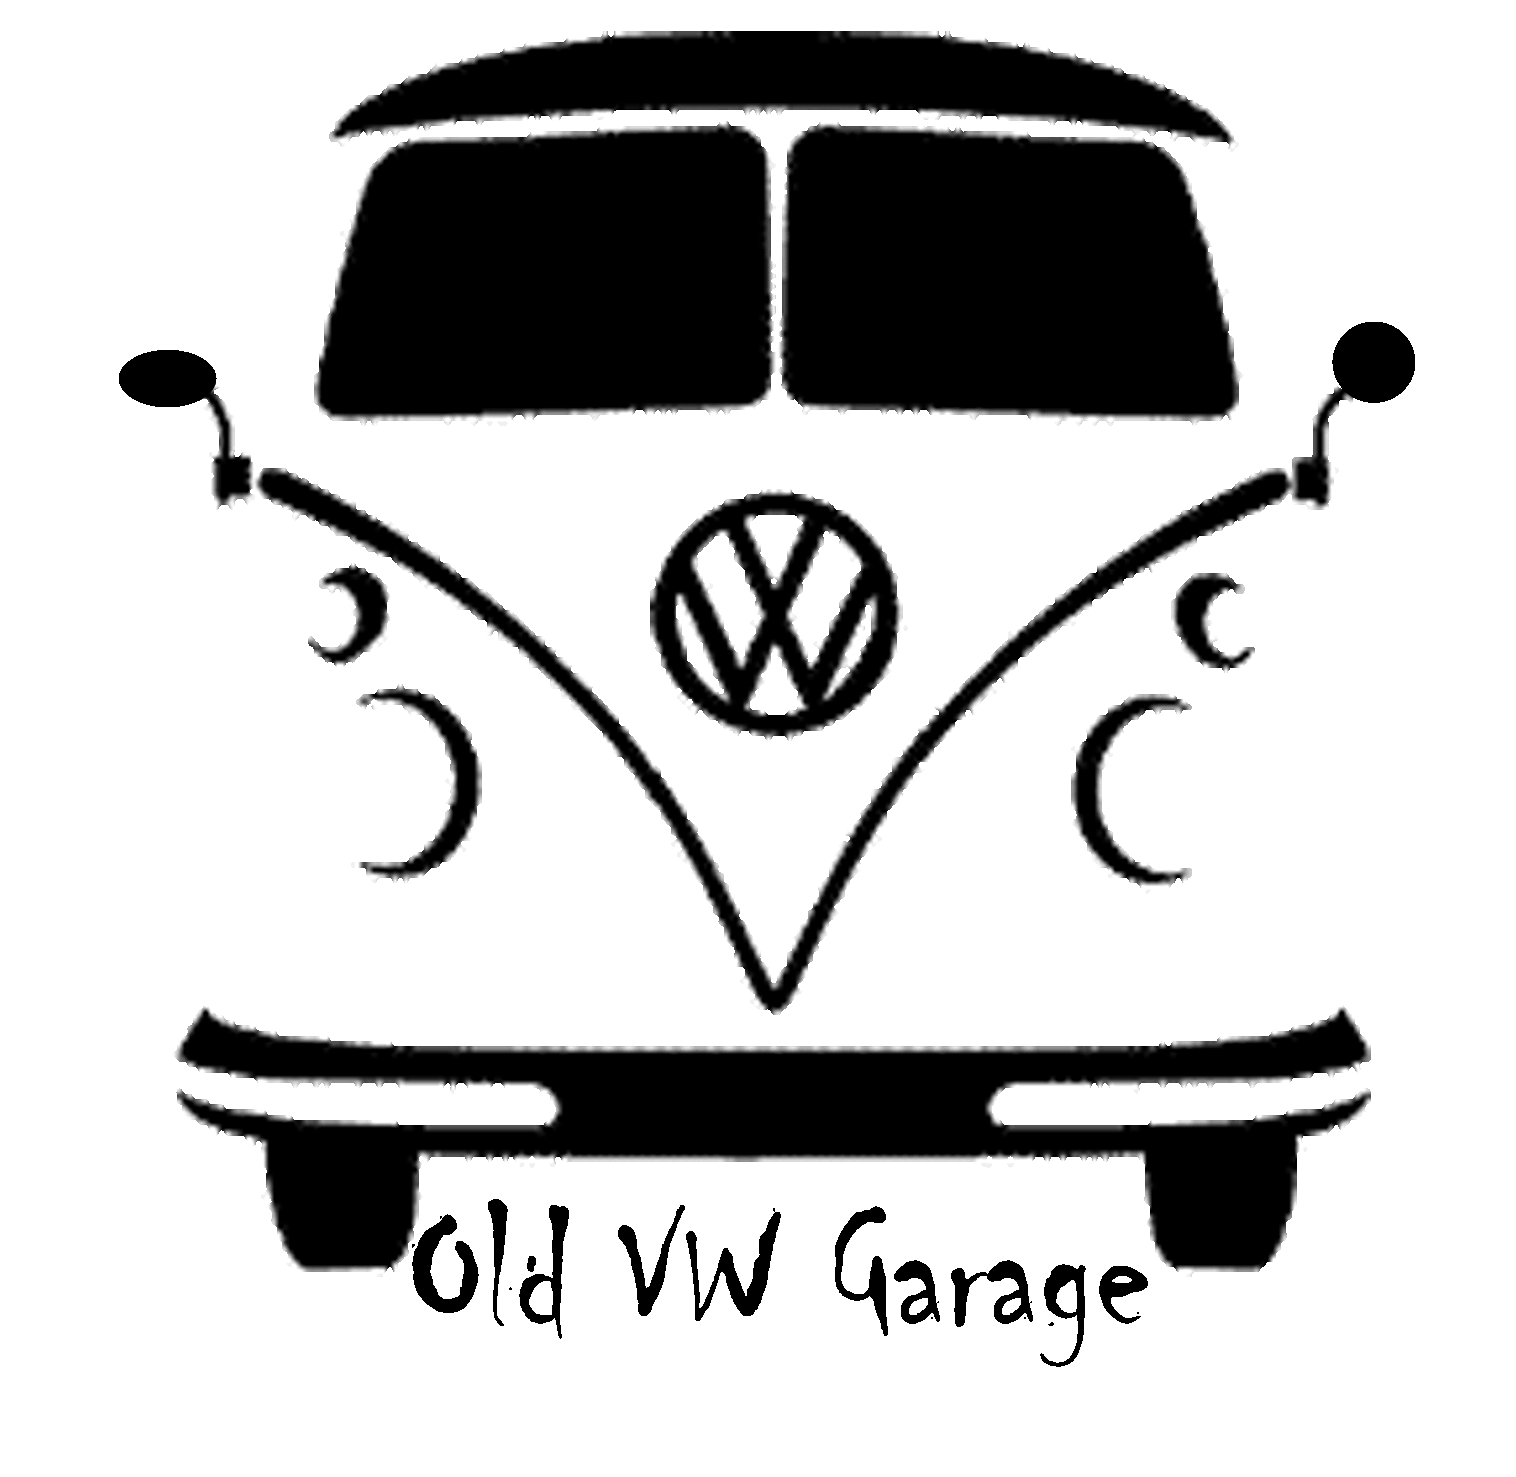 VW Van Logo - Pin by Ken Rybczyk on Products I Love | Pinterest | Vw bus, Cars and ...